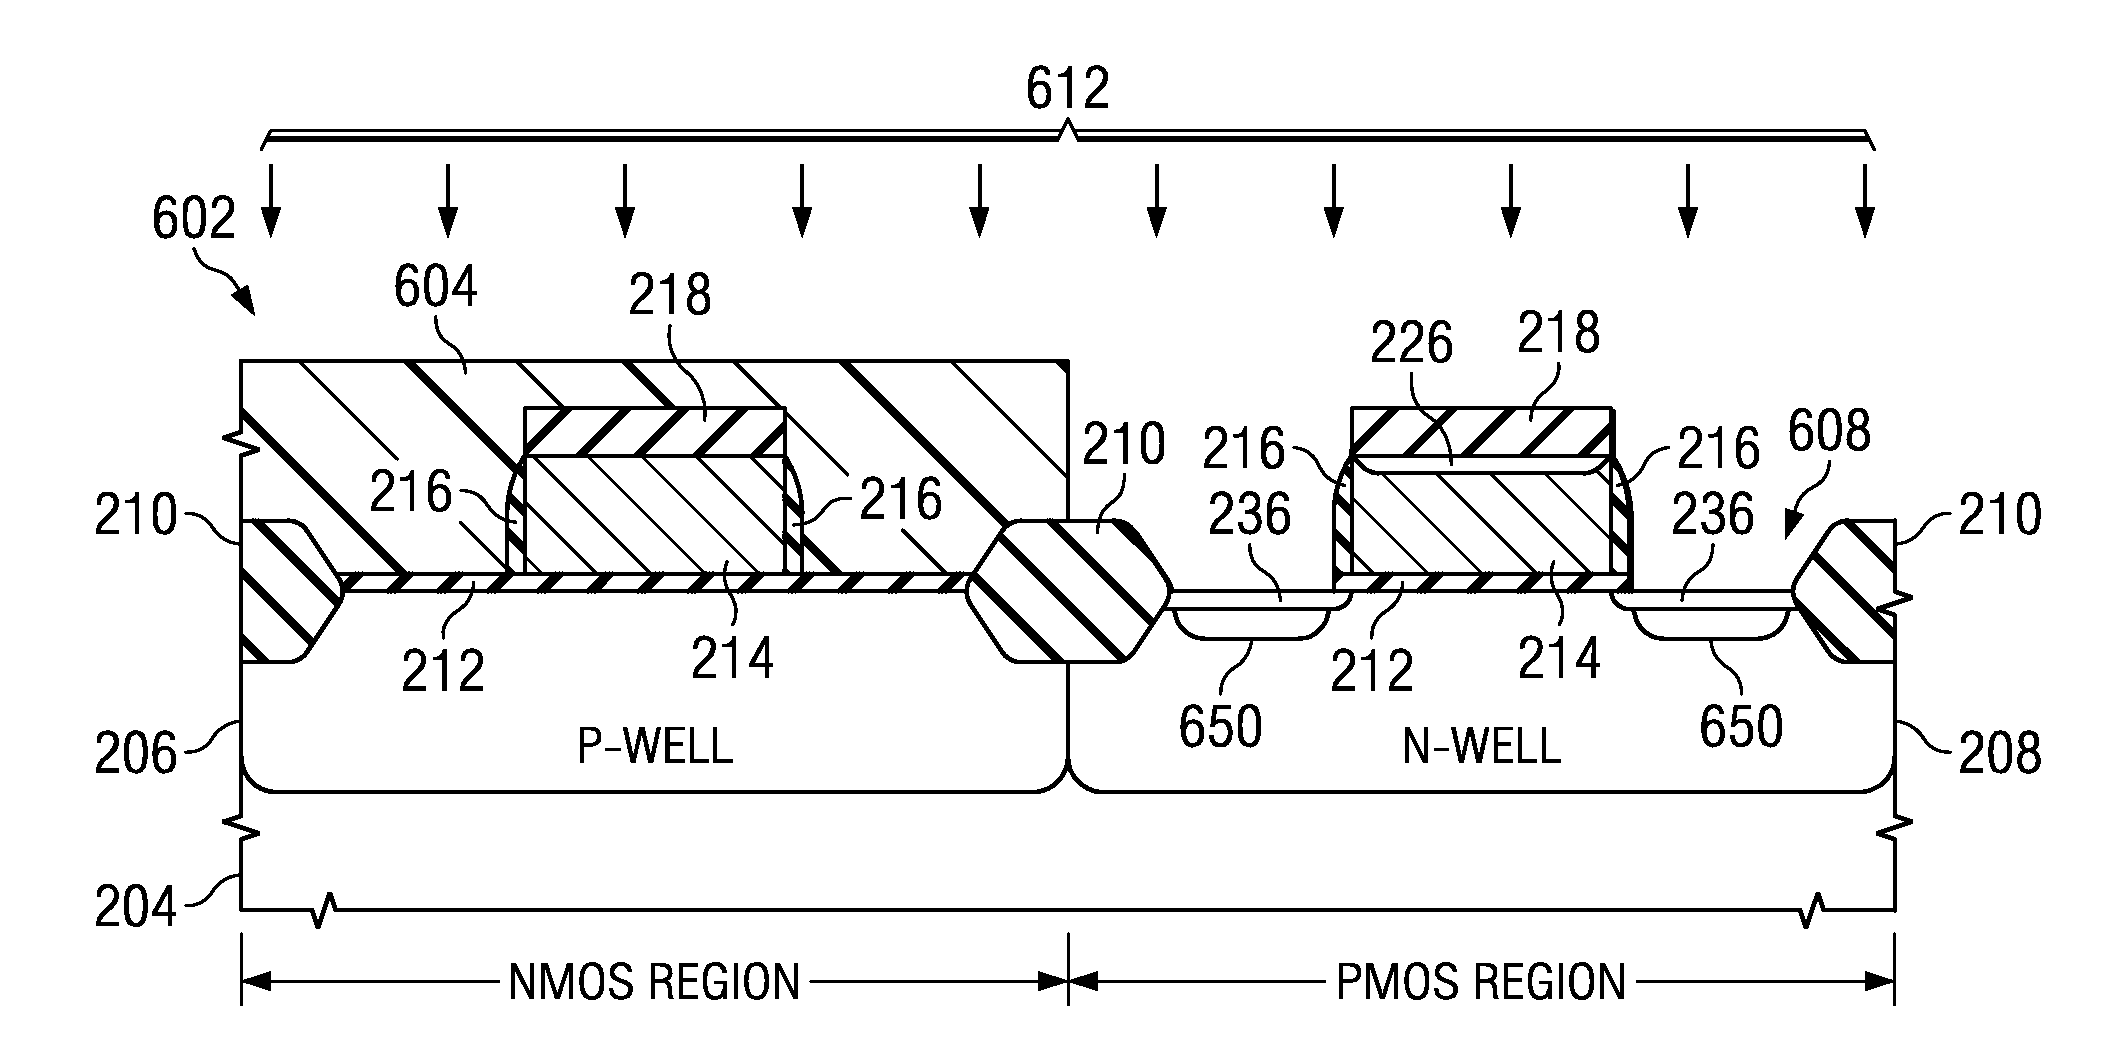 Method to improve transistor tox using si recessing with no additional masking steps